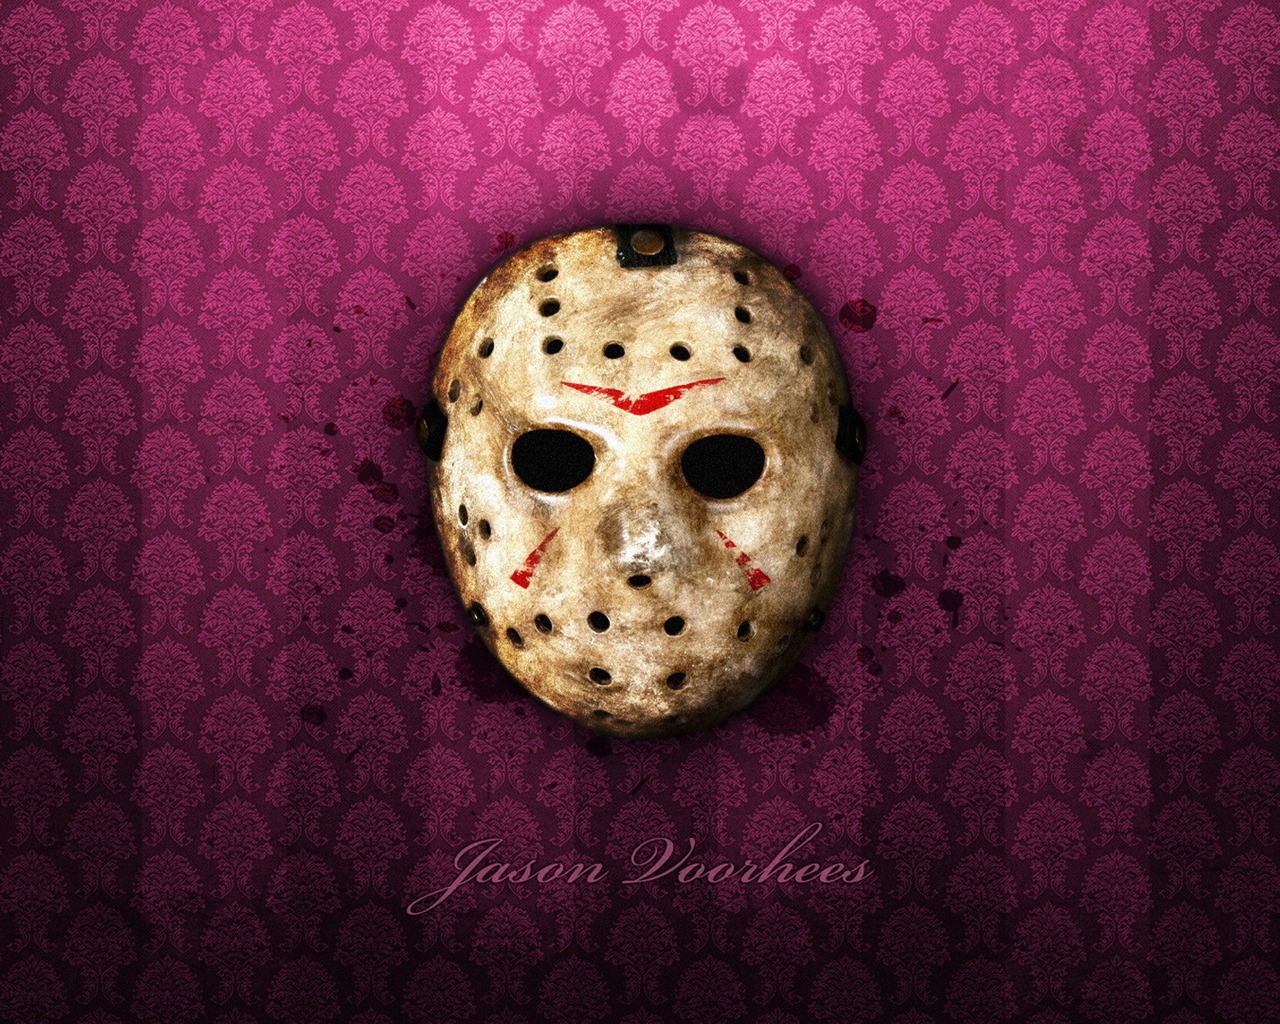 Jason Voorhees for 1280 x 1024 resolution